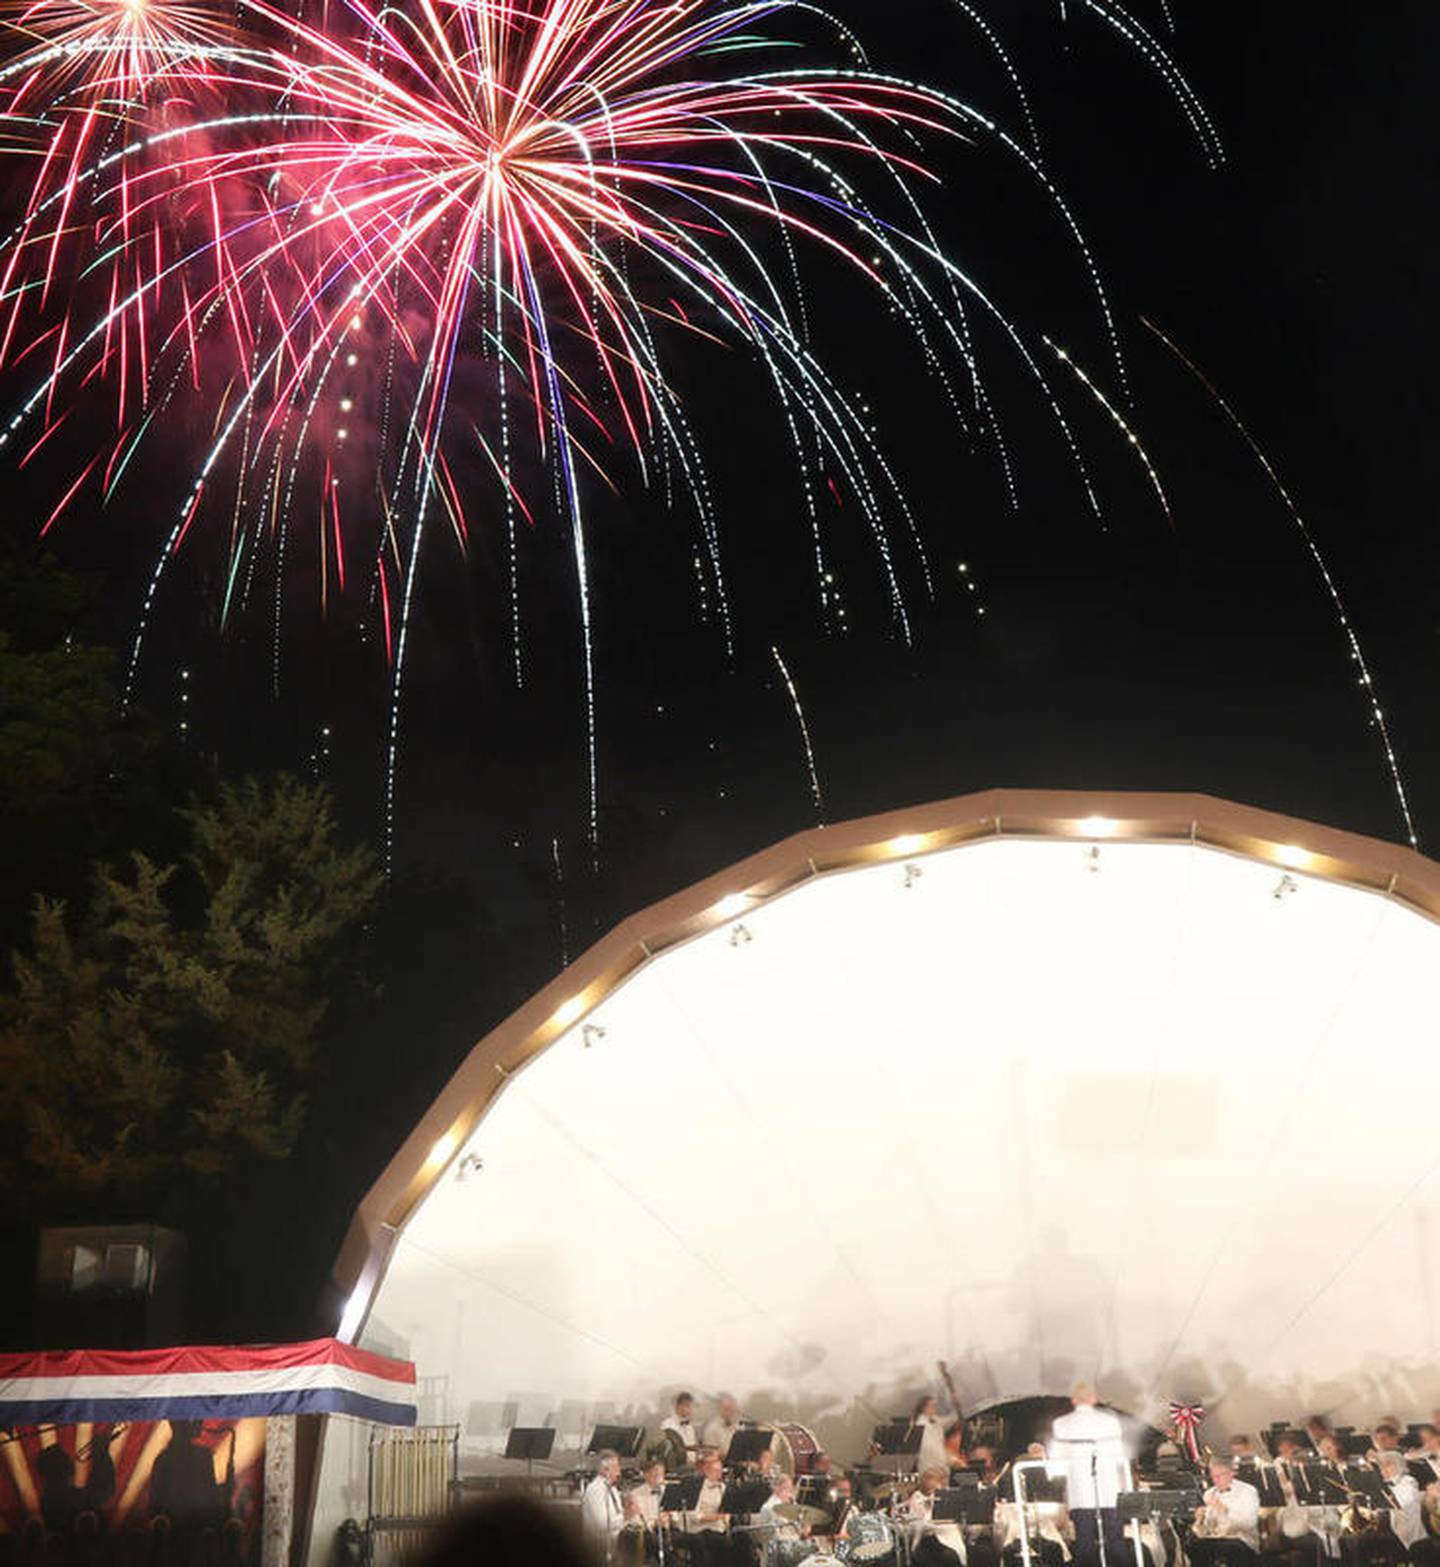 The DeKalb Municipal Band accompanies the firework display at Hopkins Park in DeKalb during the 2015 Fourth of July celebration.